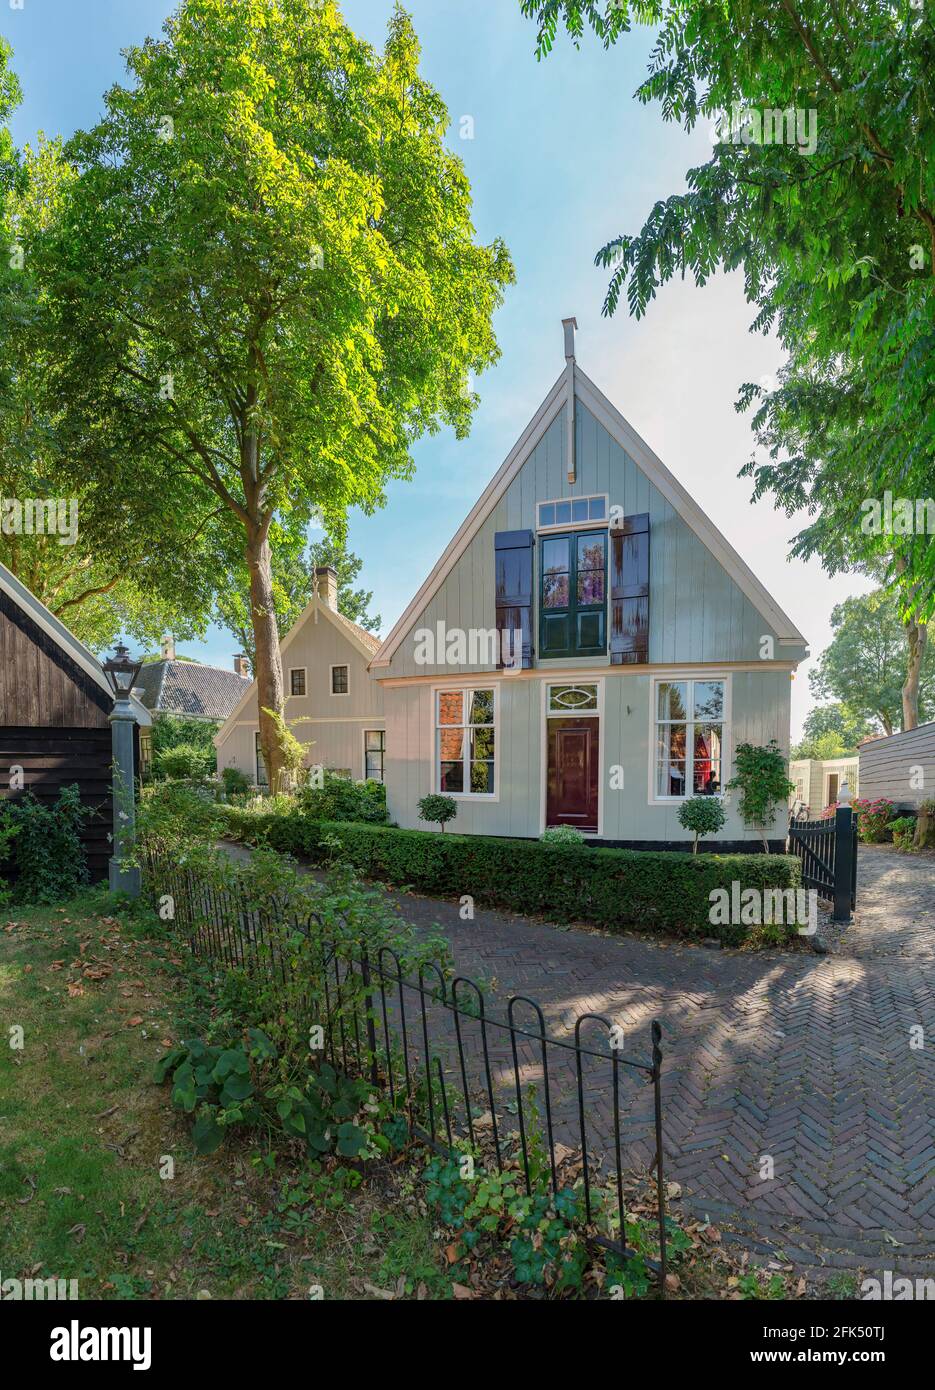 Wooden house *** Local Caption ***  Broek in Waterland,   Noord-Holland, Netherlands, city, village, forest, wood, trees, summer, Stock Photo